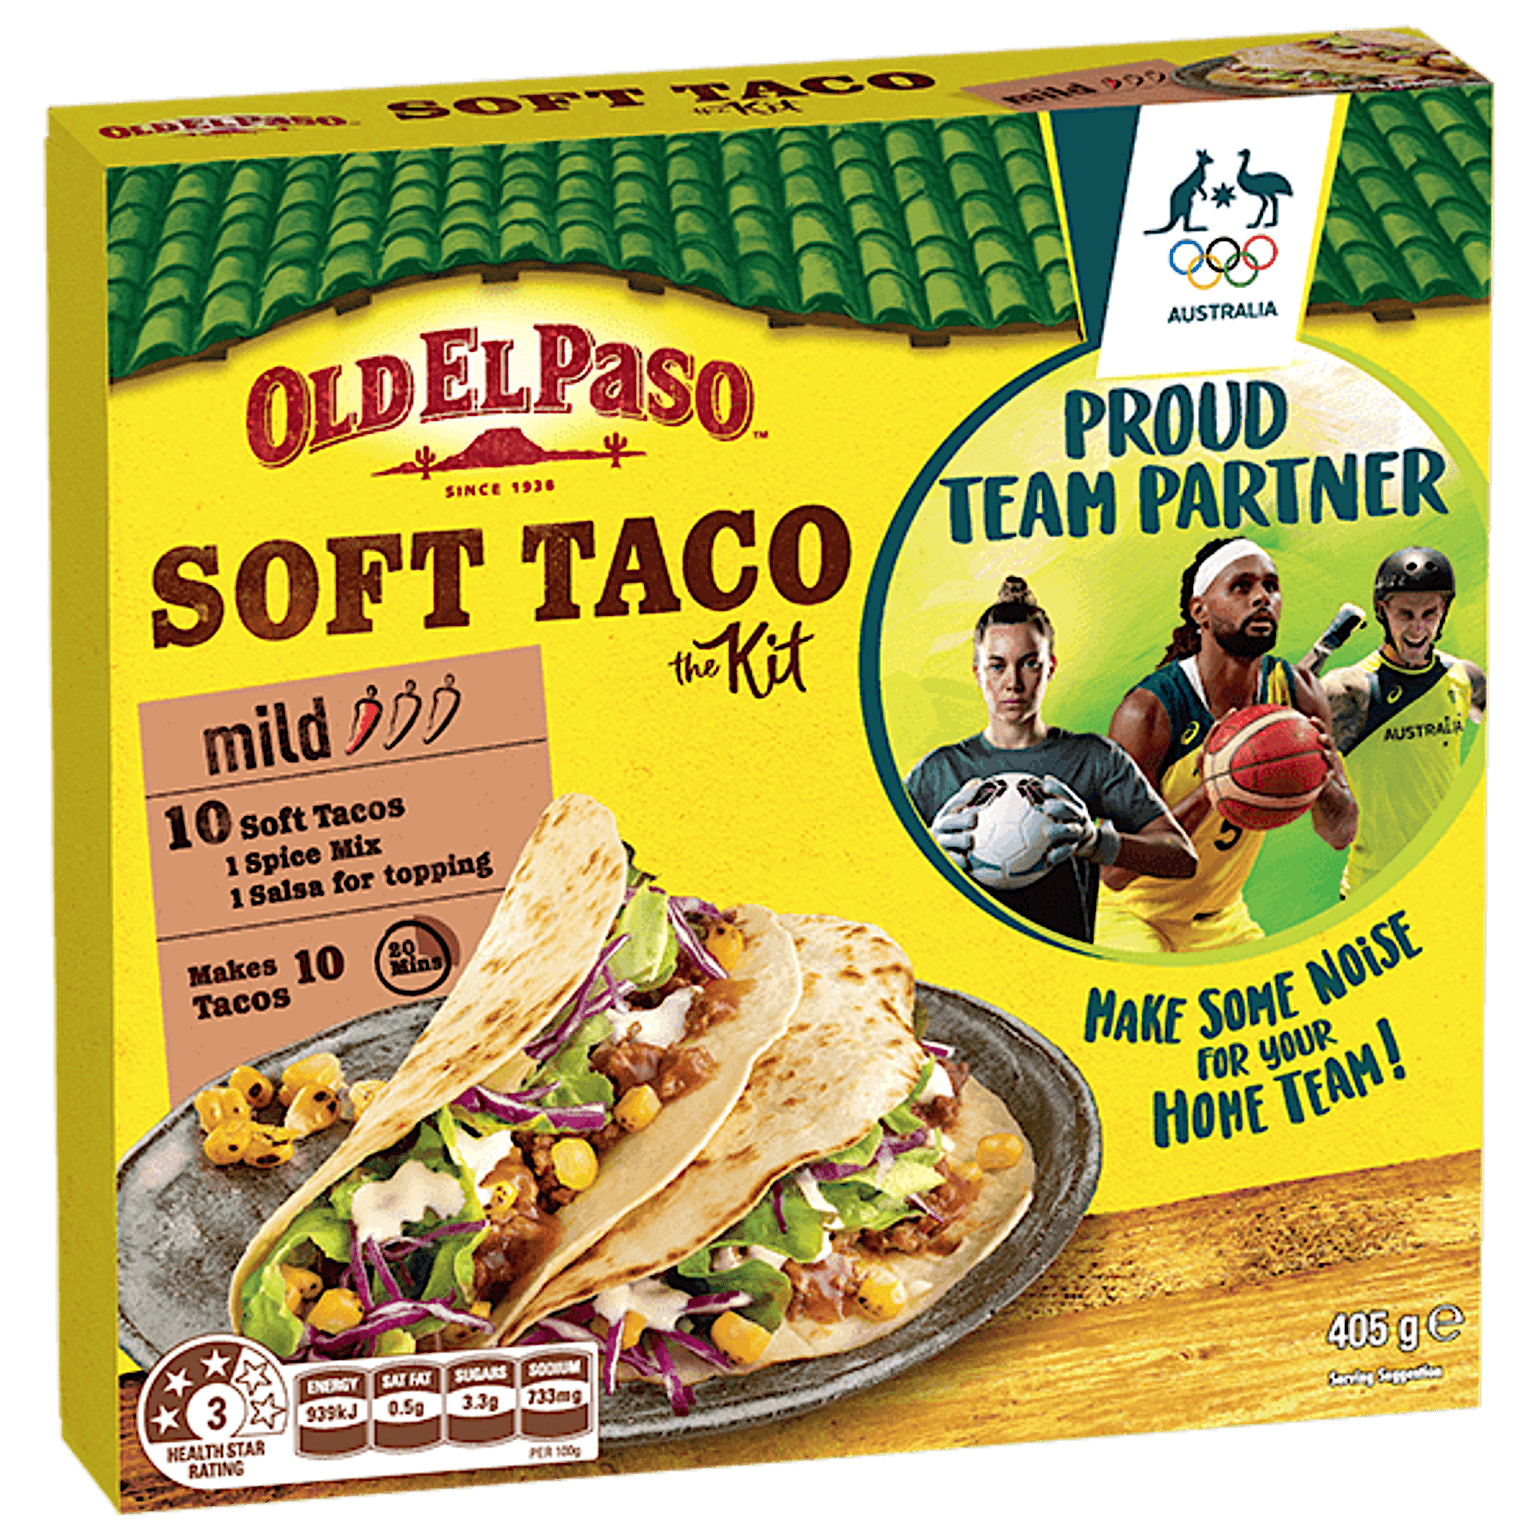 a pack of Old El Paso's mild soft taco kit containing soft tacos, spice mix & salsa for topping (405g)